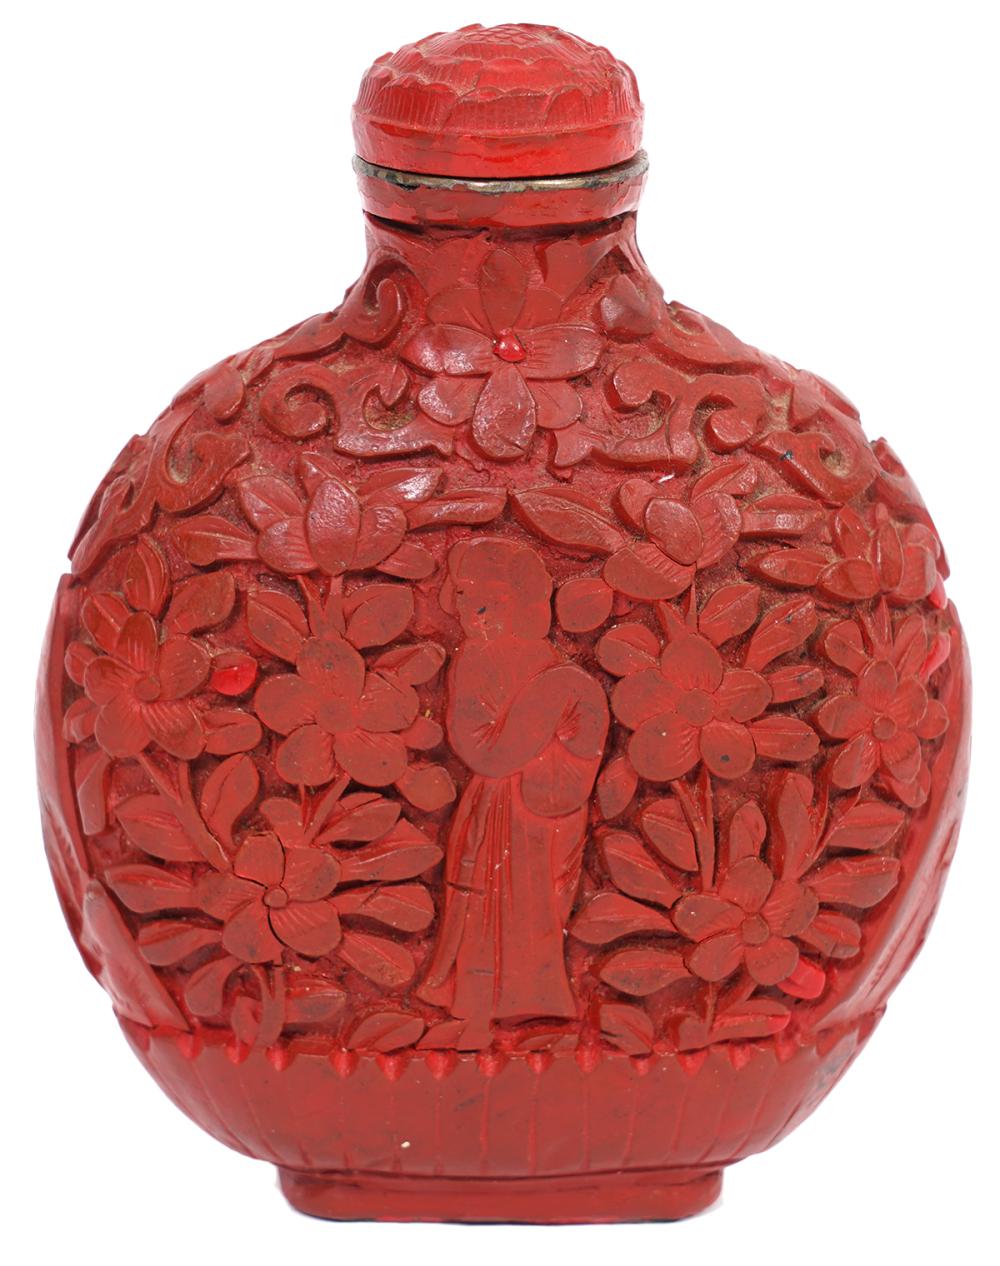 ANTIQUE CHINESE RED CINNABAR LACQUER